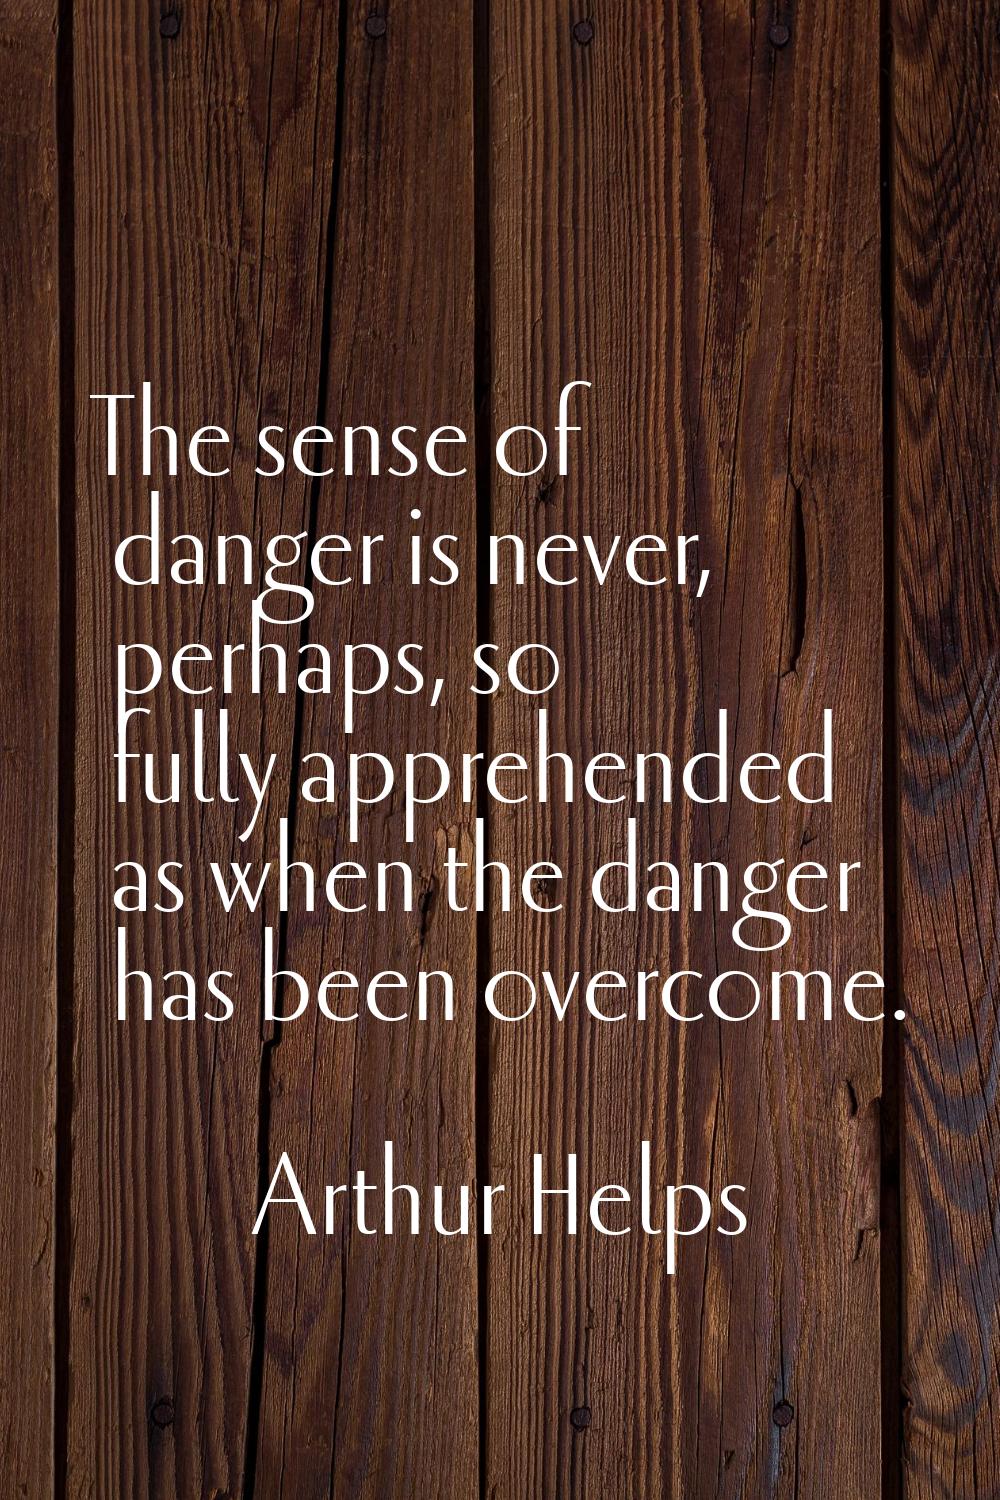 The sense of danger is never, perhaps, so fully apprehended as when the danger has been overcome.